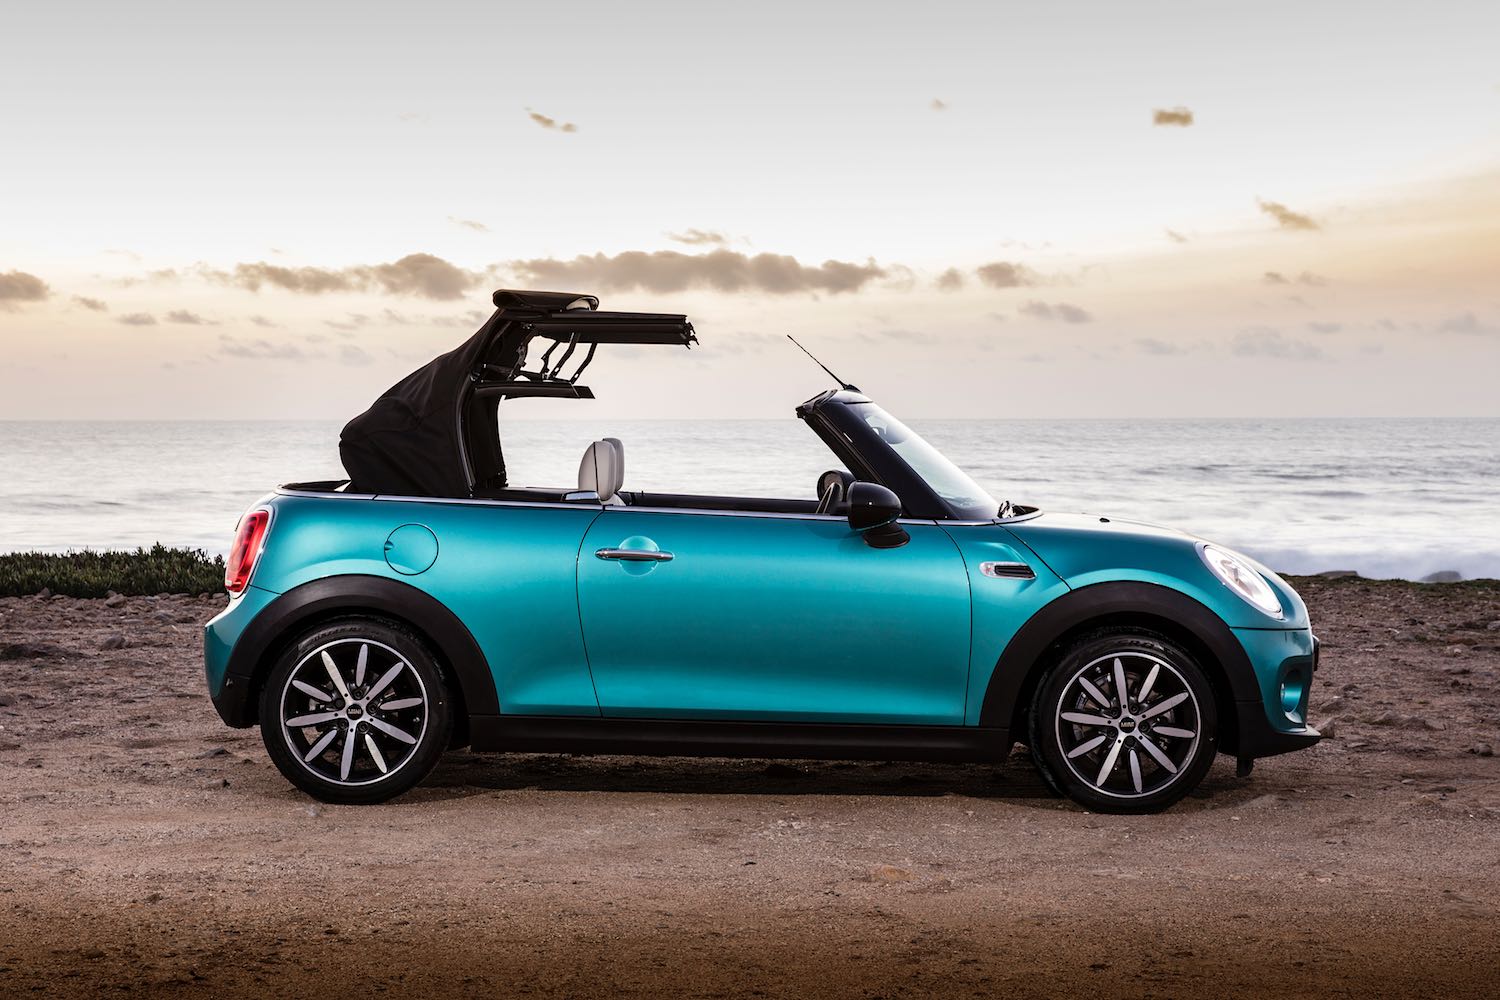 Neil Lyndon reviews the Best selling open top MINI Cooper Convertible for Drive 3